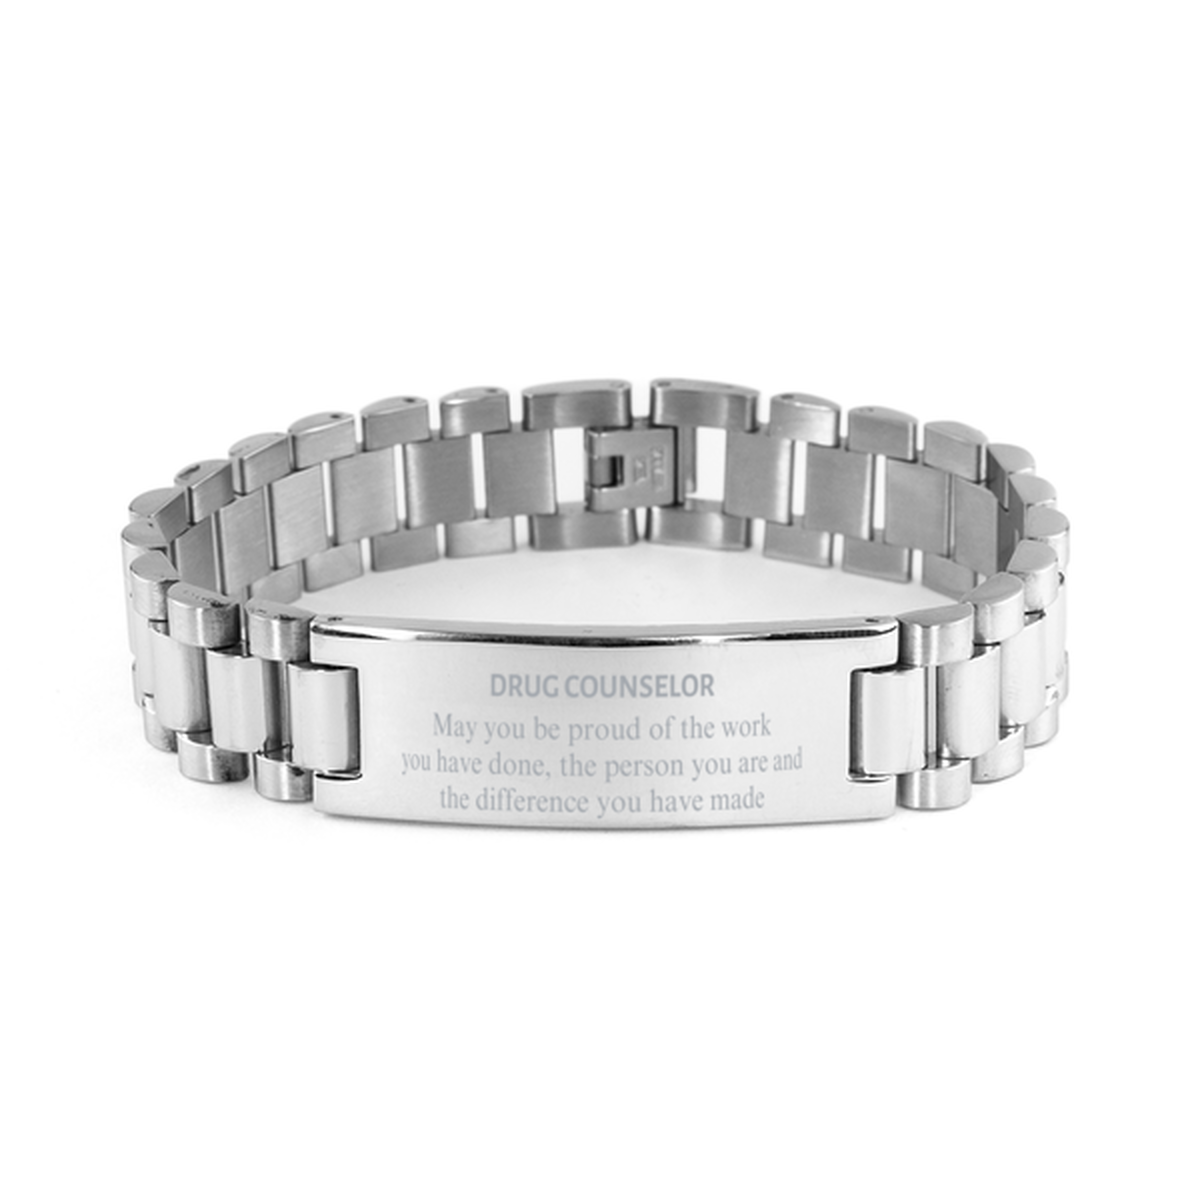 Drug Counselor May you be proud of the work you have done, Retirement Drug Counselor Ladder Stainless Steel Bracelet for Colleague Appreciation Gifts Amazing for Drug Counselor